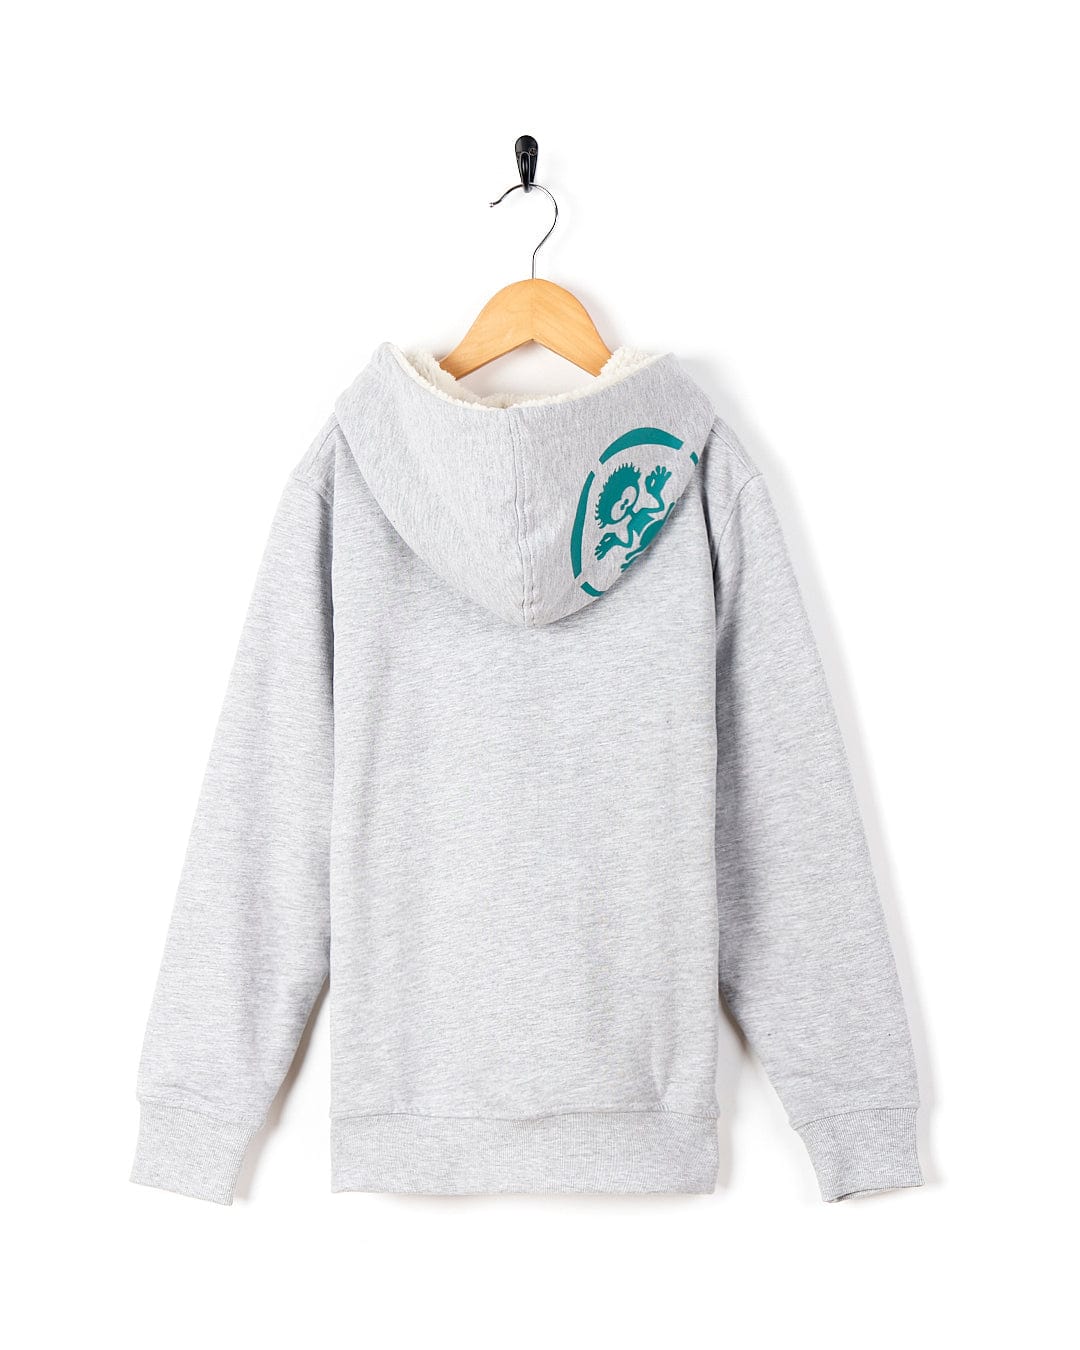 A Watergate - Kids Lined Hoodie - Grey with a green logo on it. (Brand Name: Saltrock)